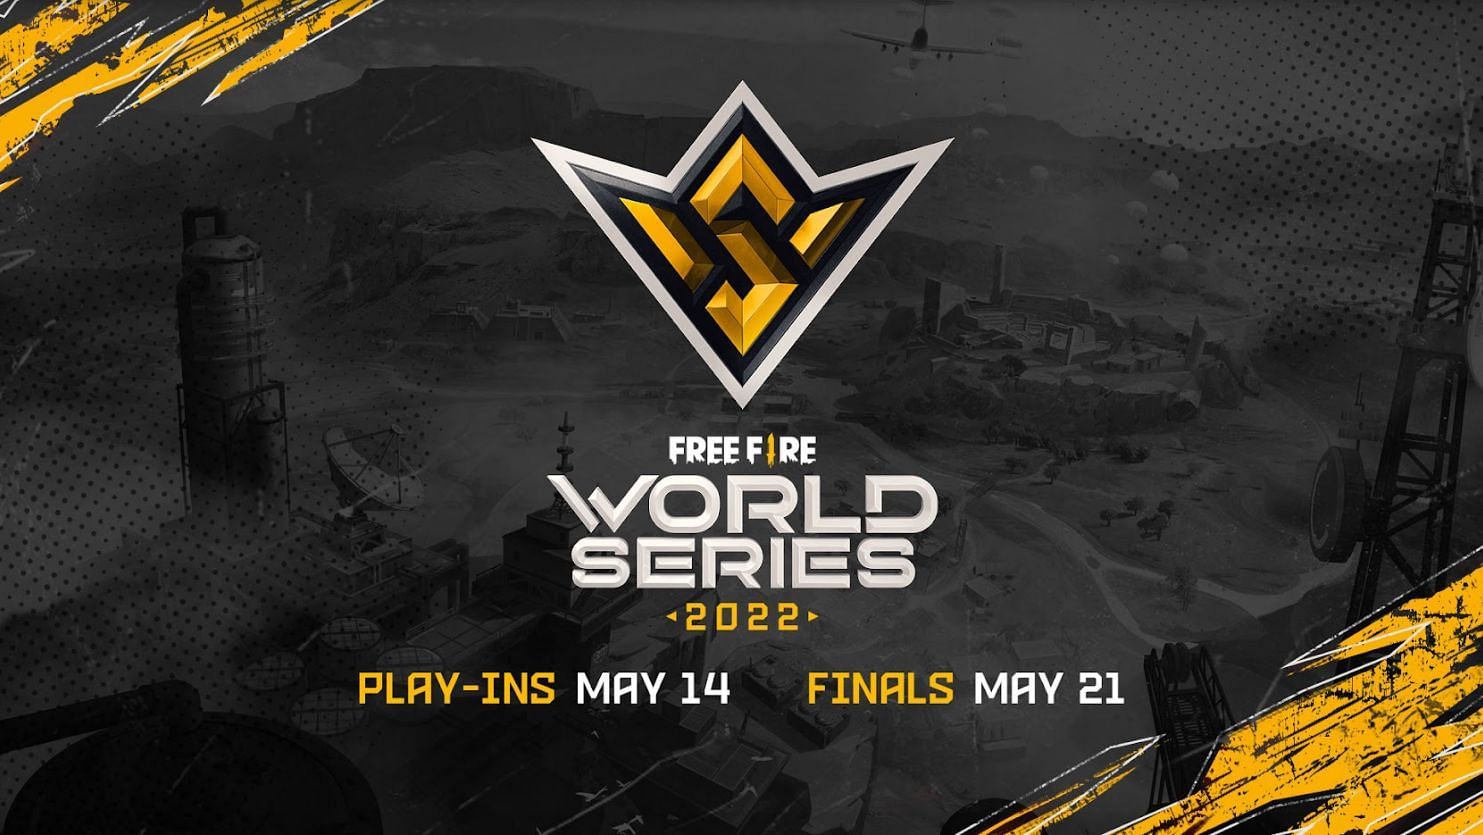 Free Fire World Series 2022 - Play ins on 14 May 2022; Finals 21 May